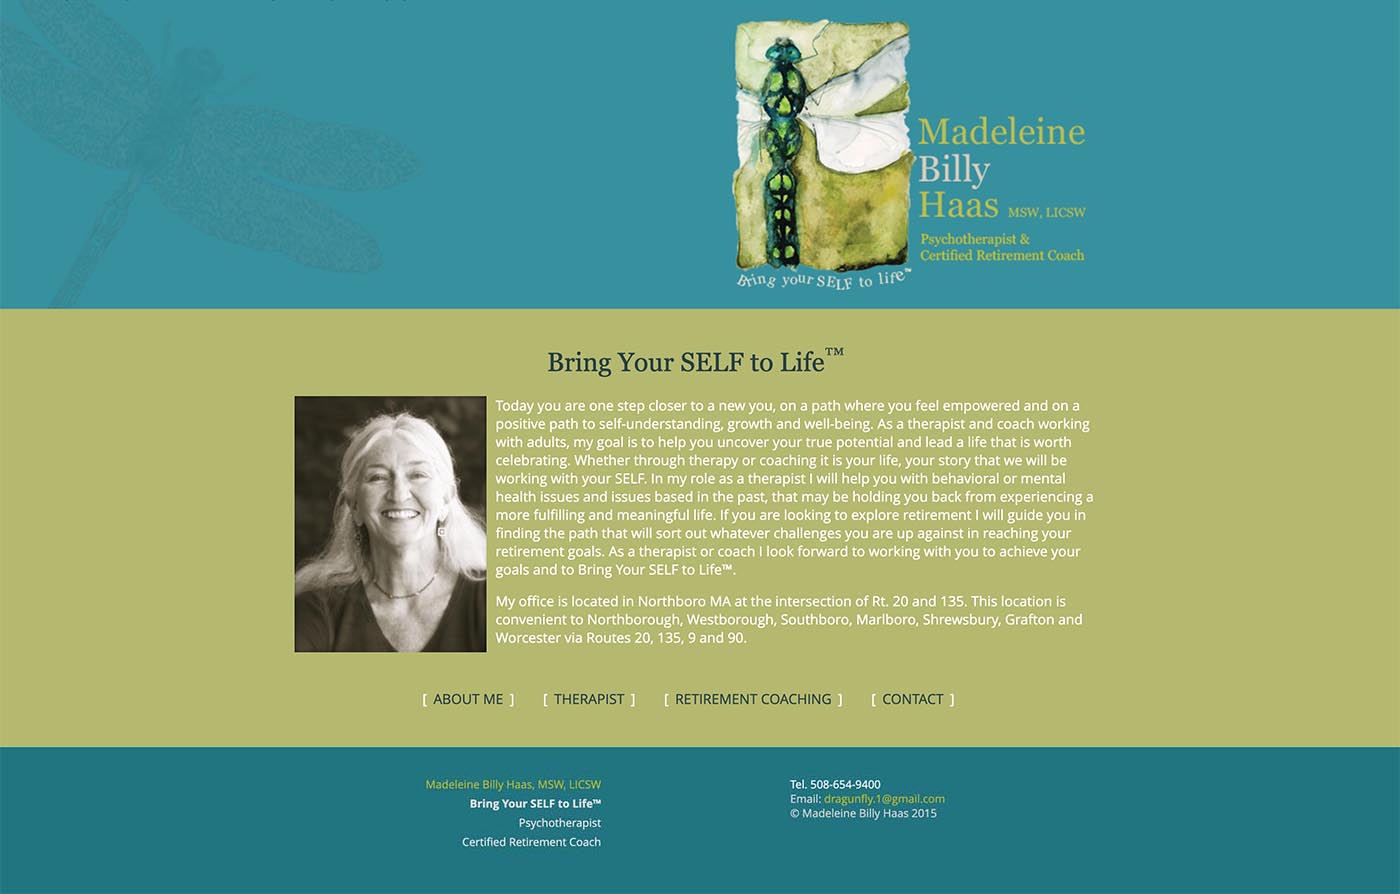 website design for a therapist - Billy Haas